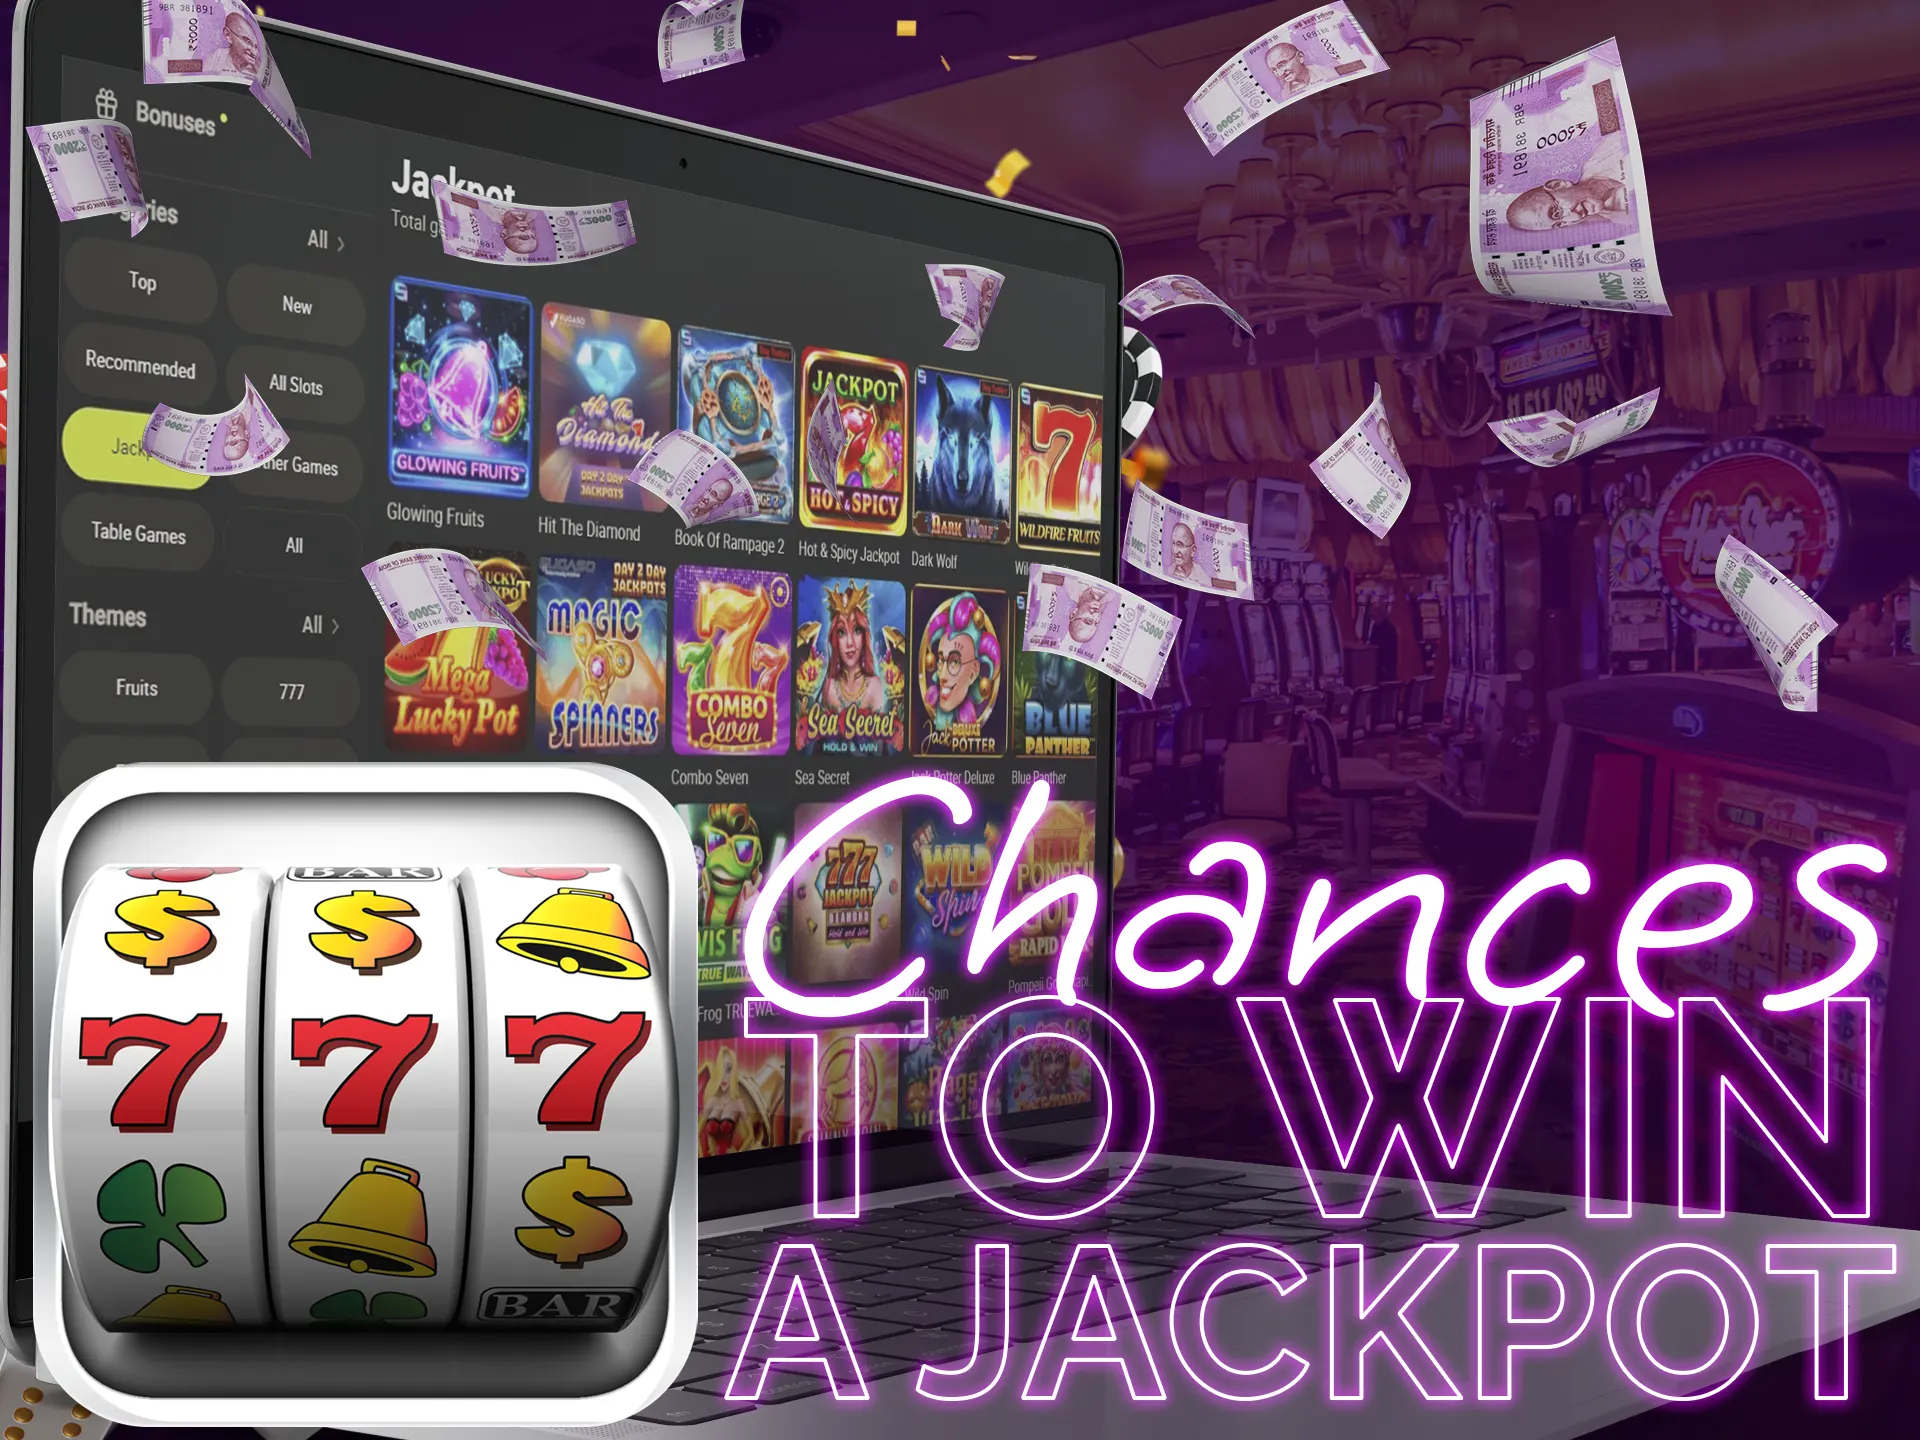 Every player should at least try to win the jackpot.